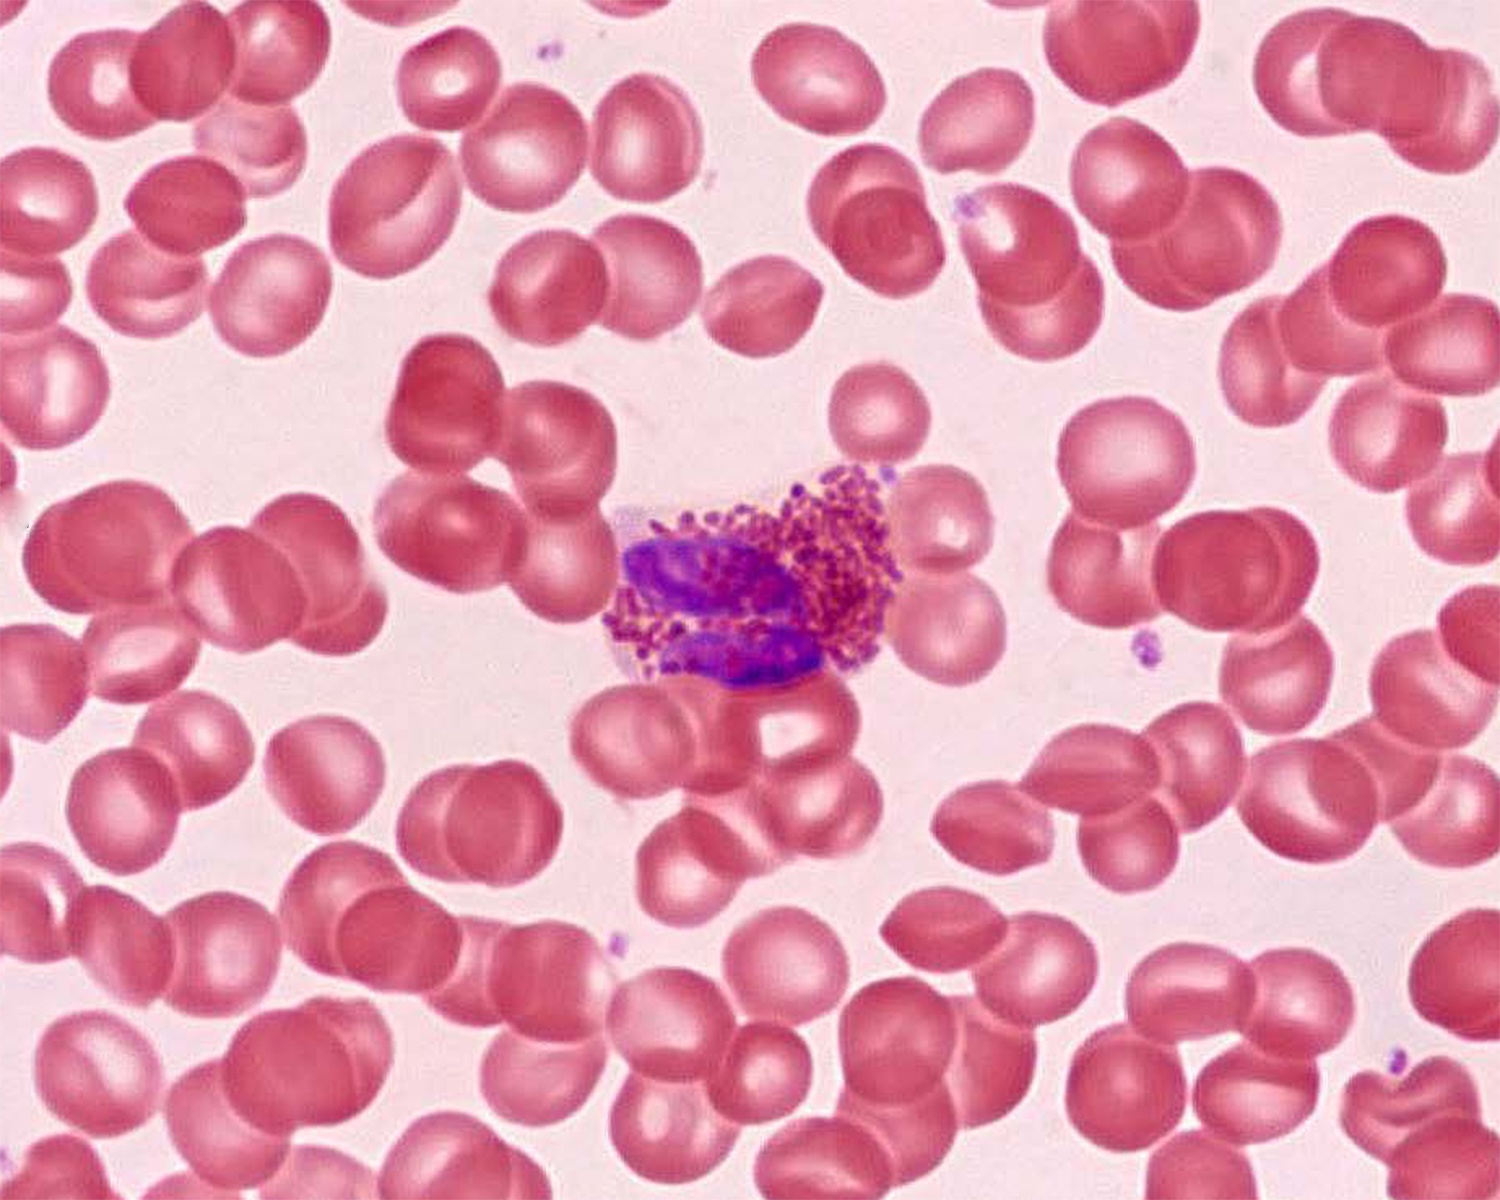 Blood under a microscope. Part 1. Red blood cells, neutrophils, basophils and eosinophils - My, The medicine, Histology, Microscope, Informative, Longpost